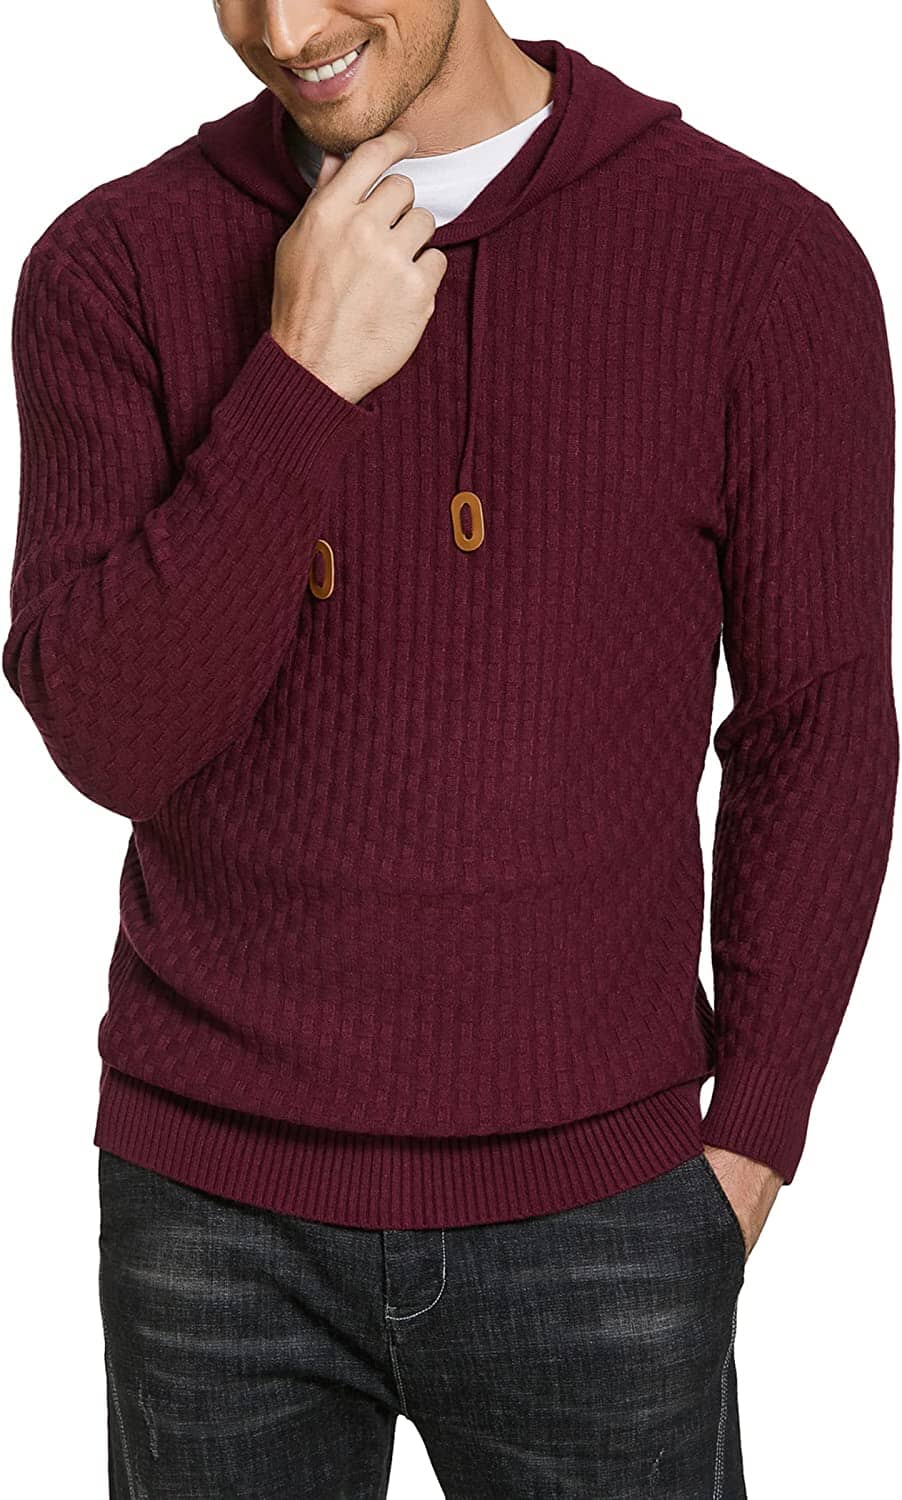 Solid Knitted Pullover Hooded Sweatshirt (US Only) Hoodies Brand: COOFANDY Wine Red S 